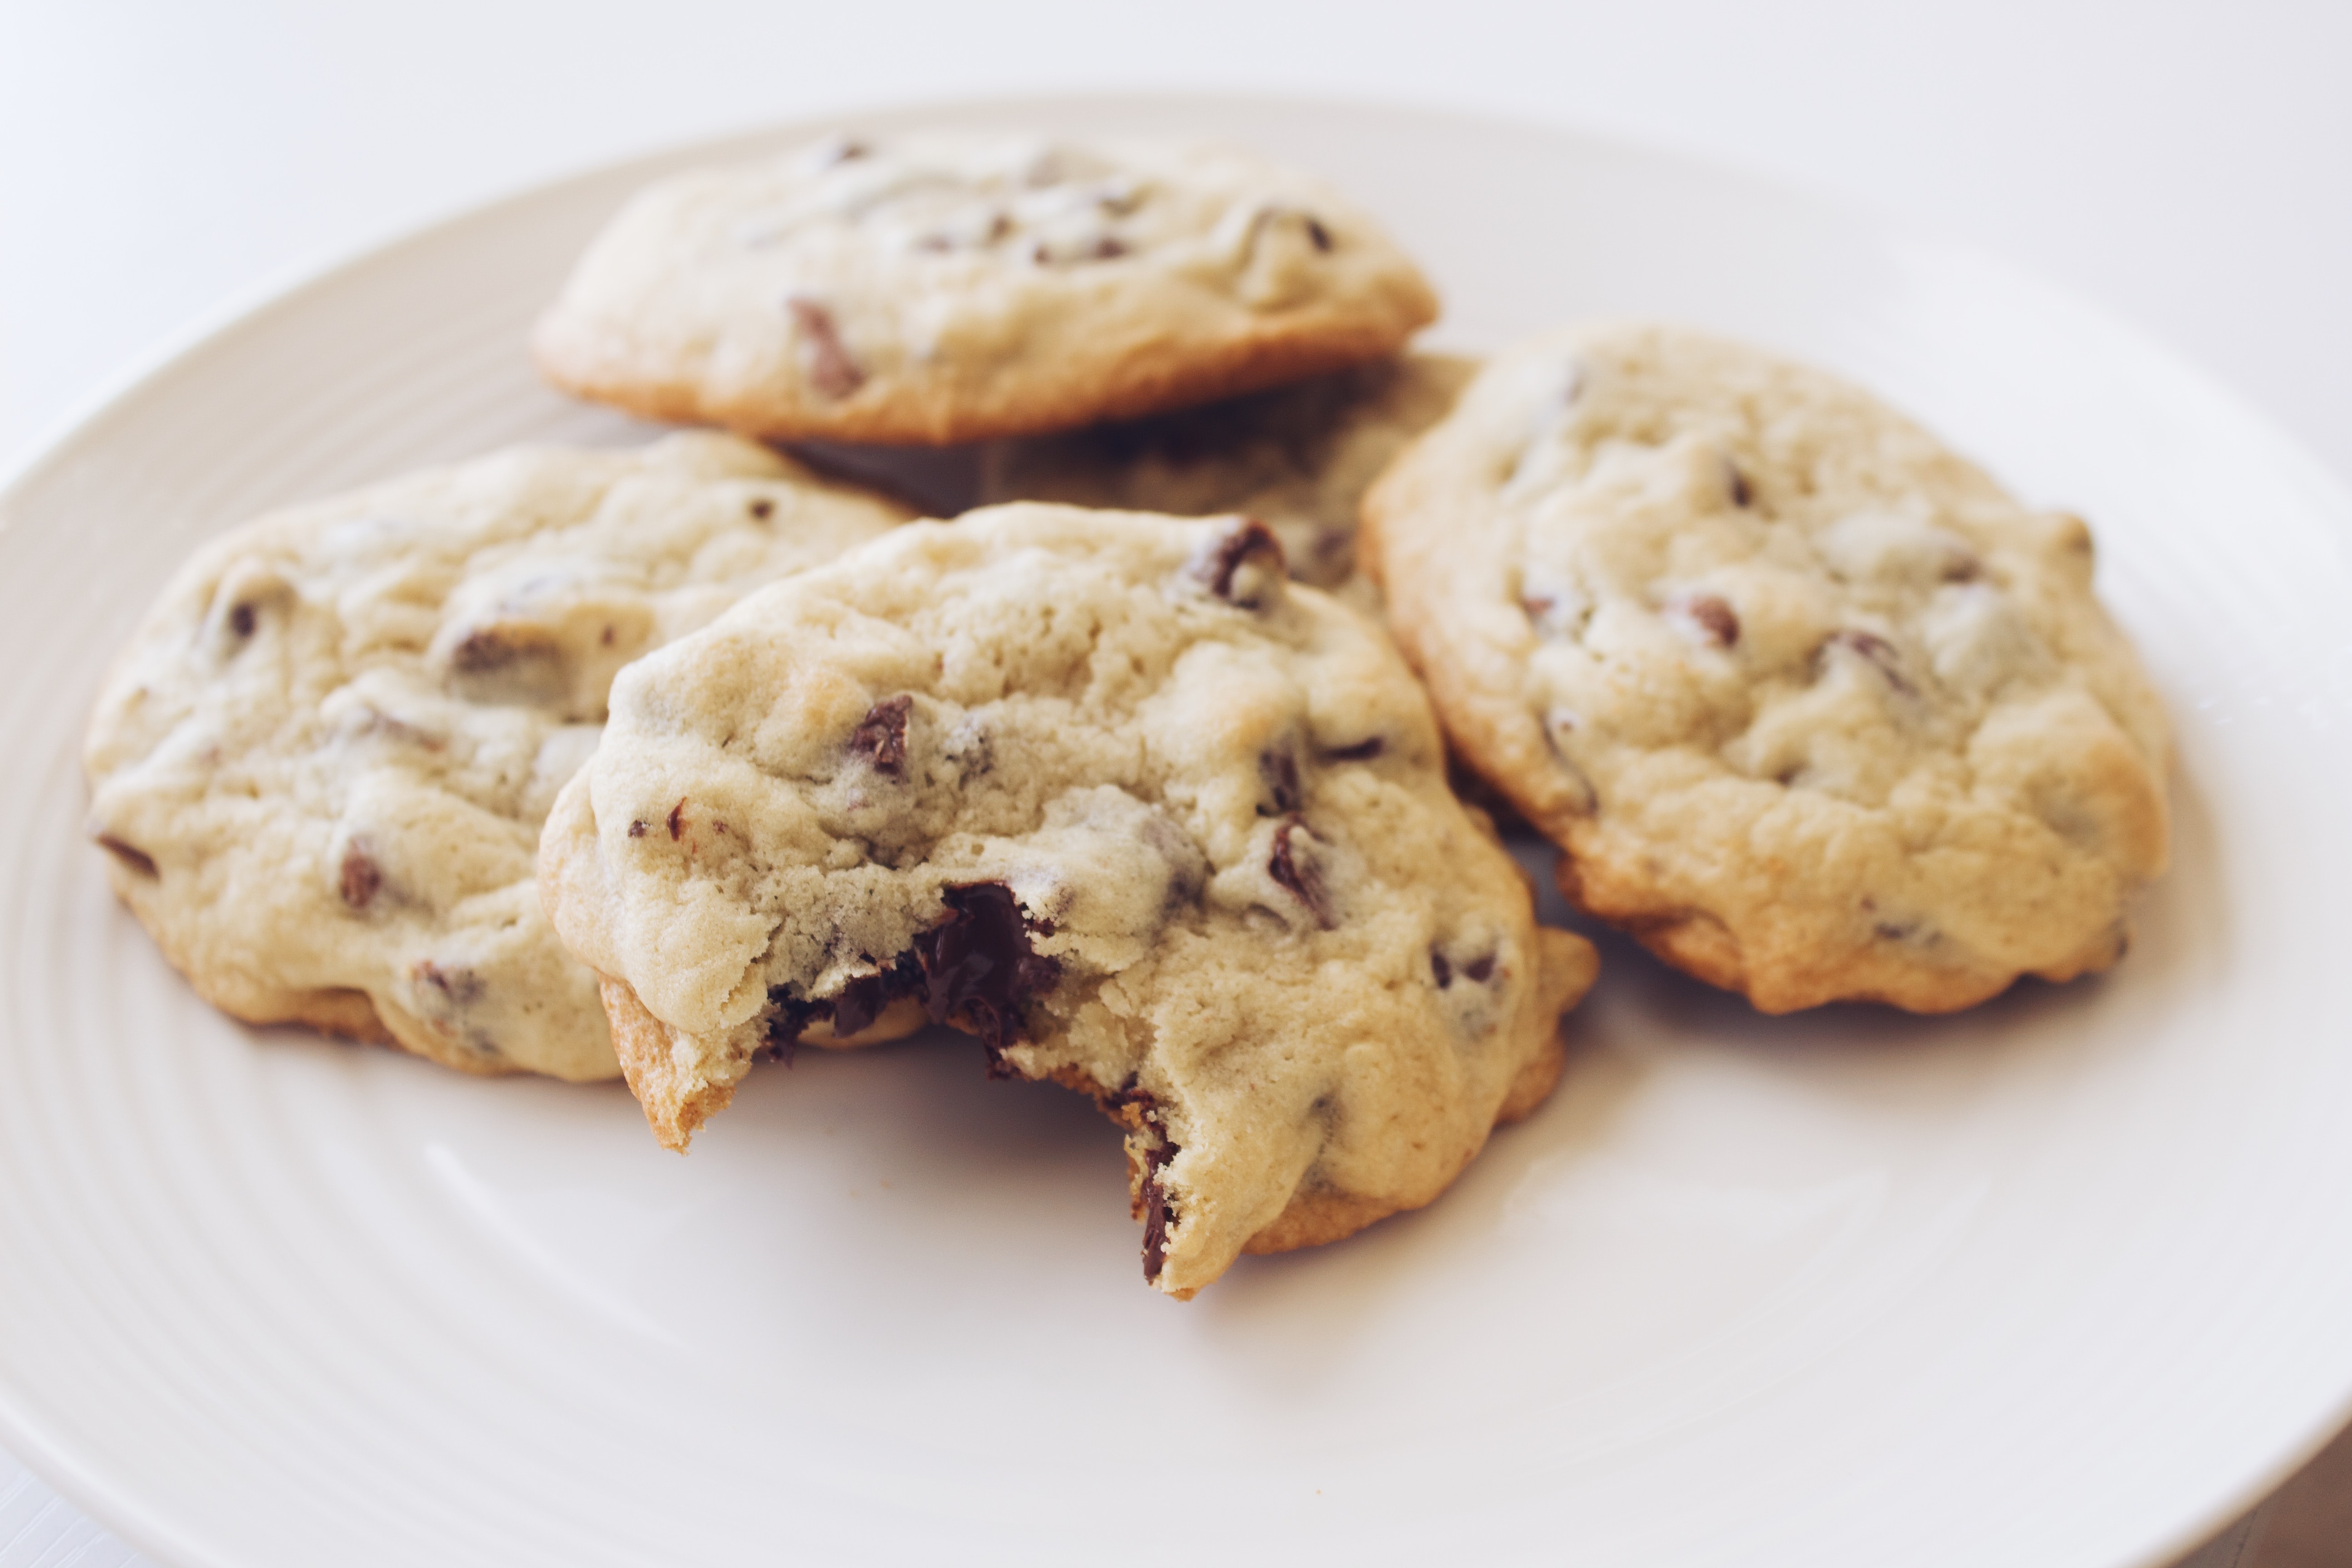 Healthiest and Yummiest Chocolate Chip Cookies